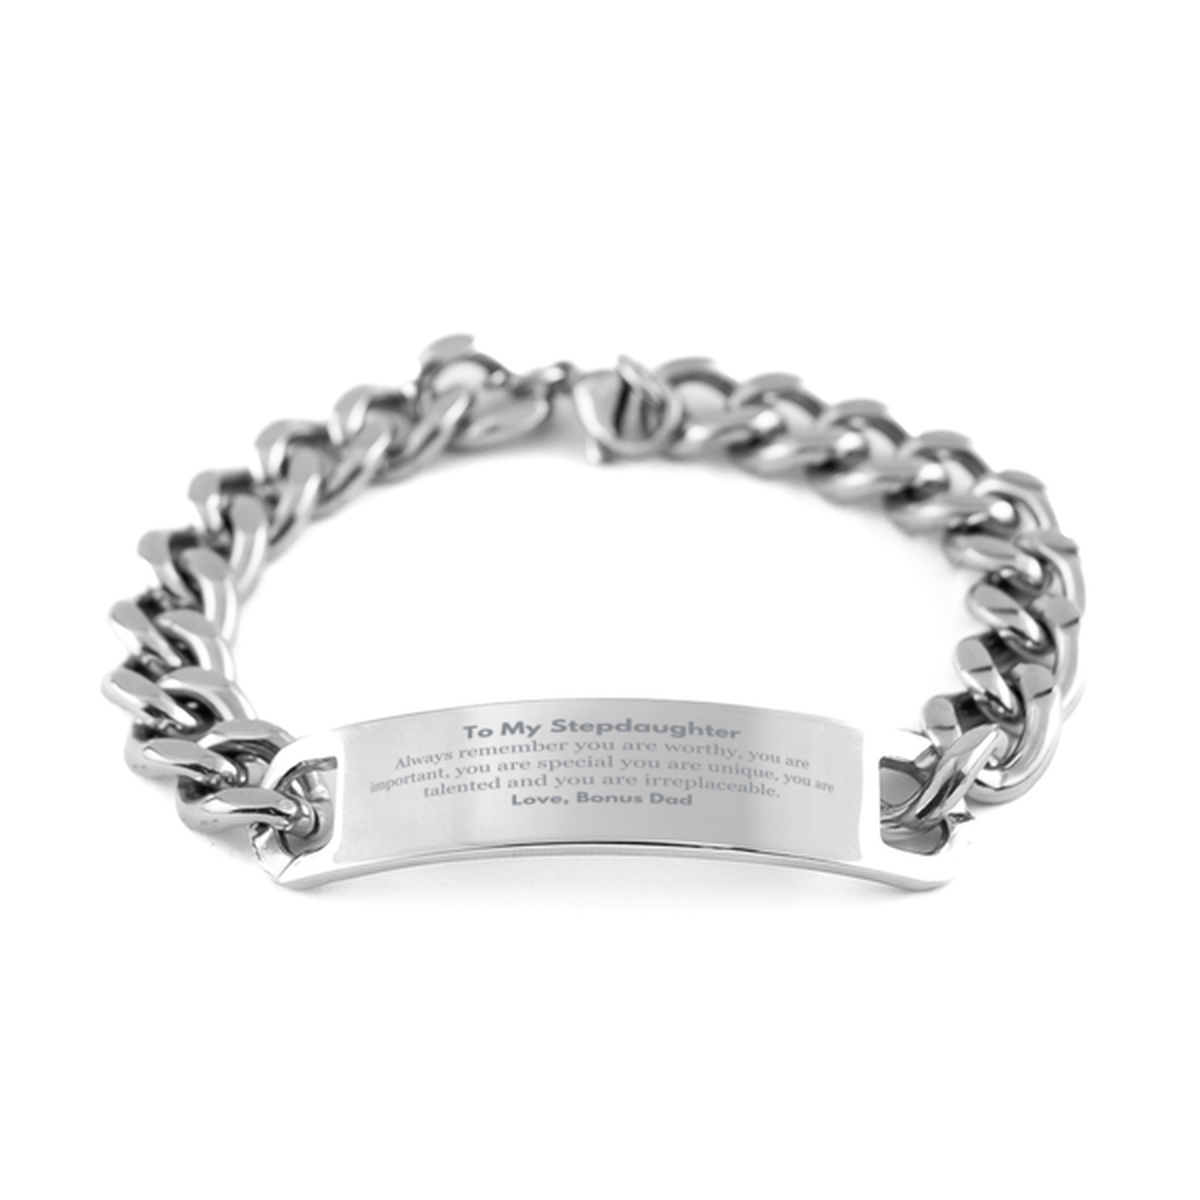 Stepdaughter Birthday Gifts from Bonus Dad, Inspirational Cuban Chain Stainless Steel Bracelet for Stepdaughter Christmas Graduation Gifts for Stepdaughter Always remember you are worthy, you are important. Love, Bonus Dad